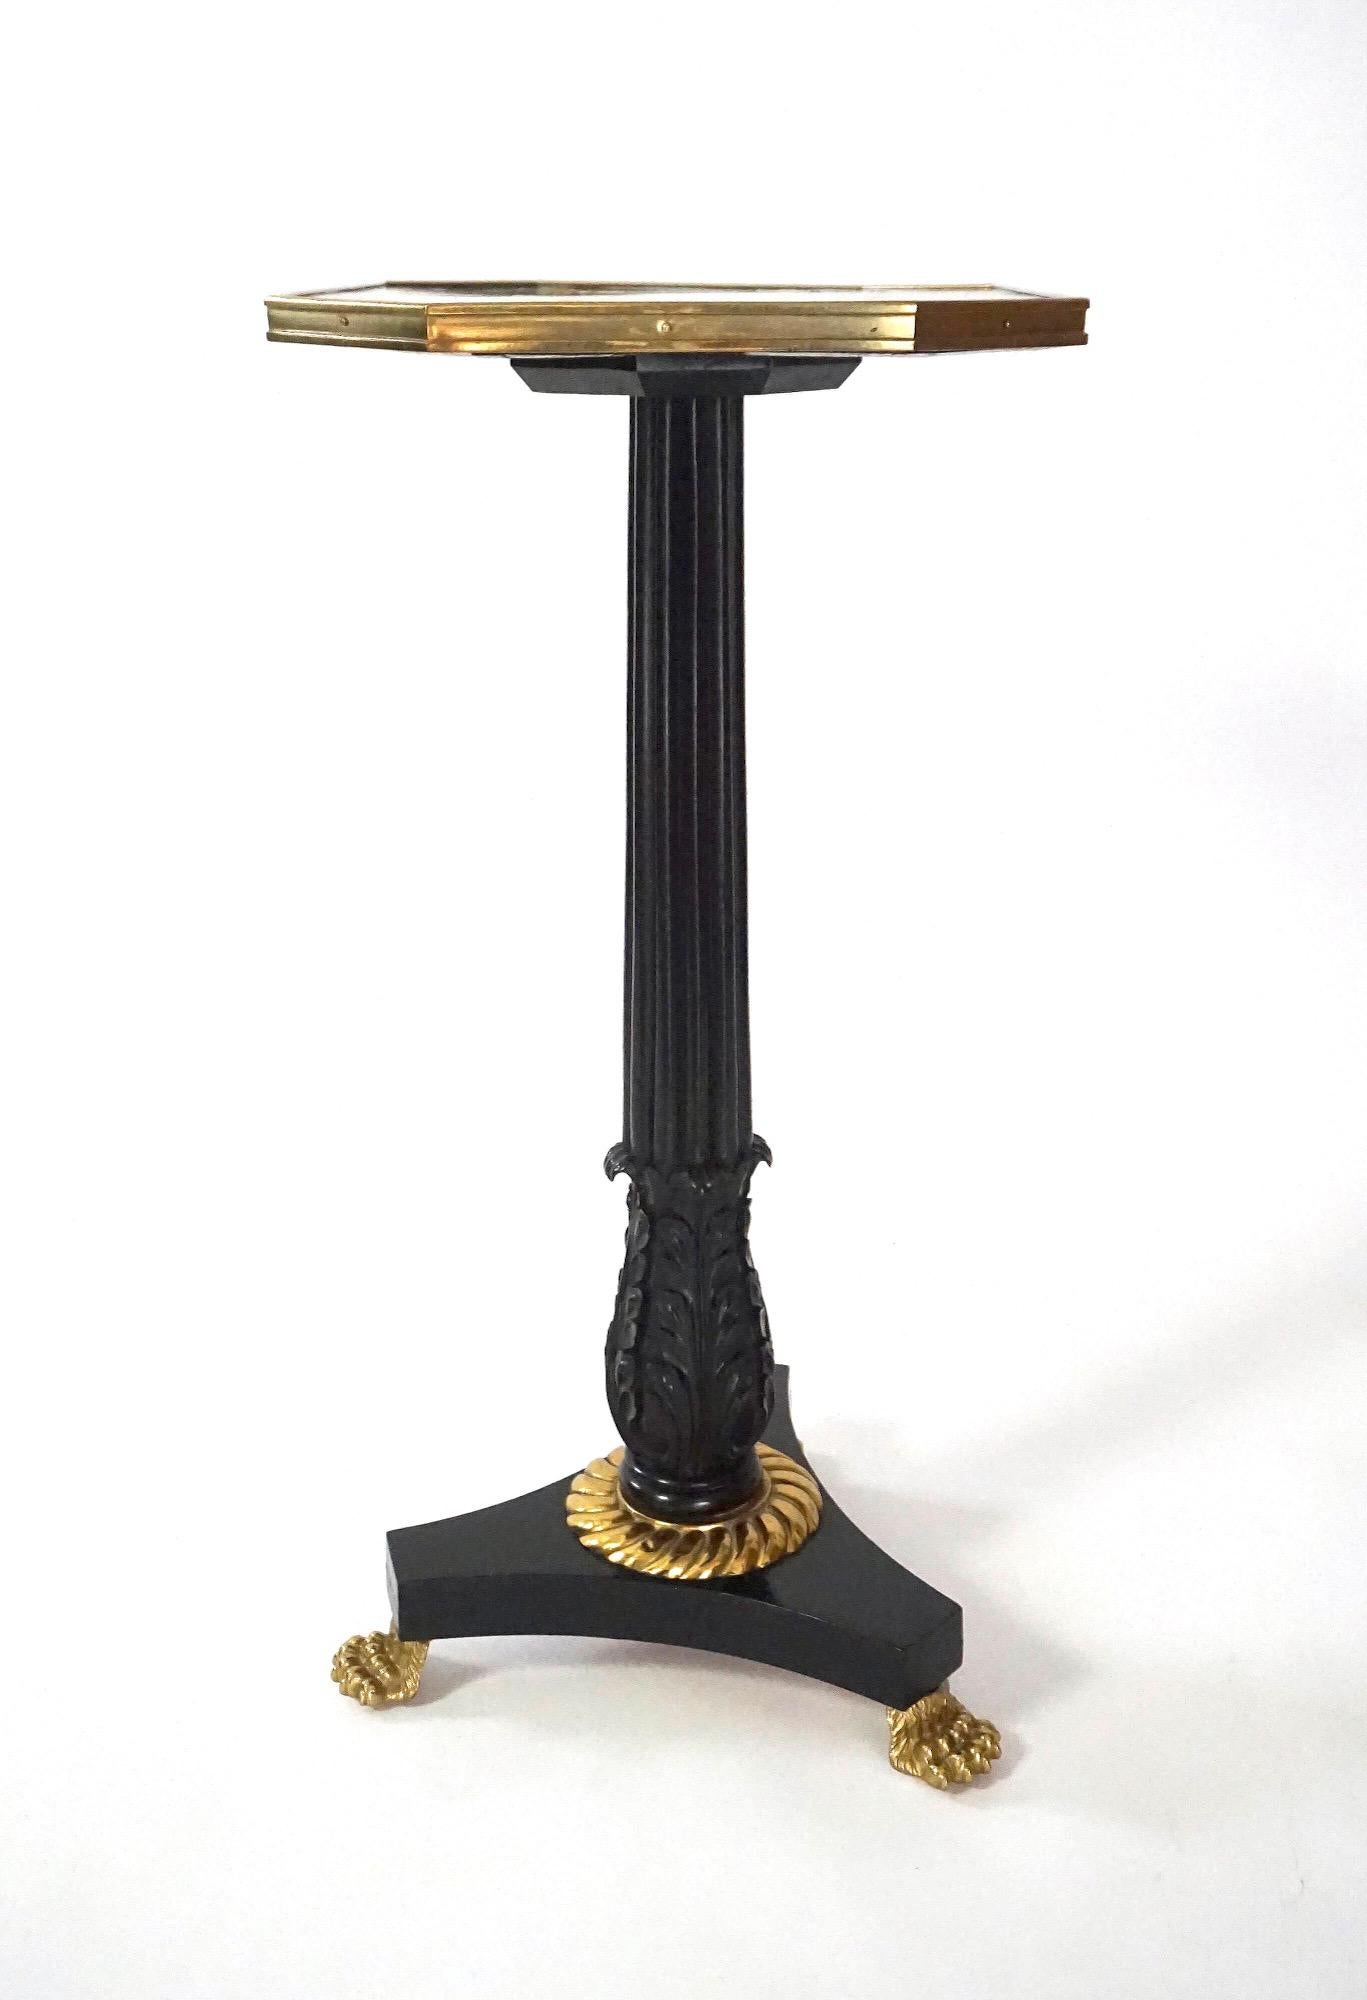 English Regency Chinoiserie Lacquer Top Ebonized Brass Mounted Stand, circa 1820 For Sale 3